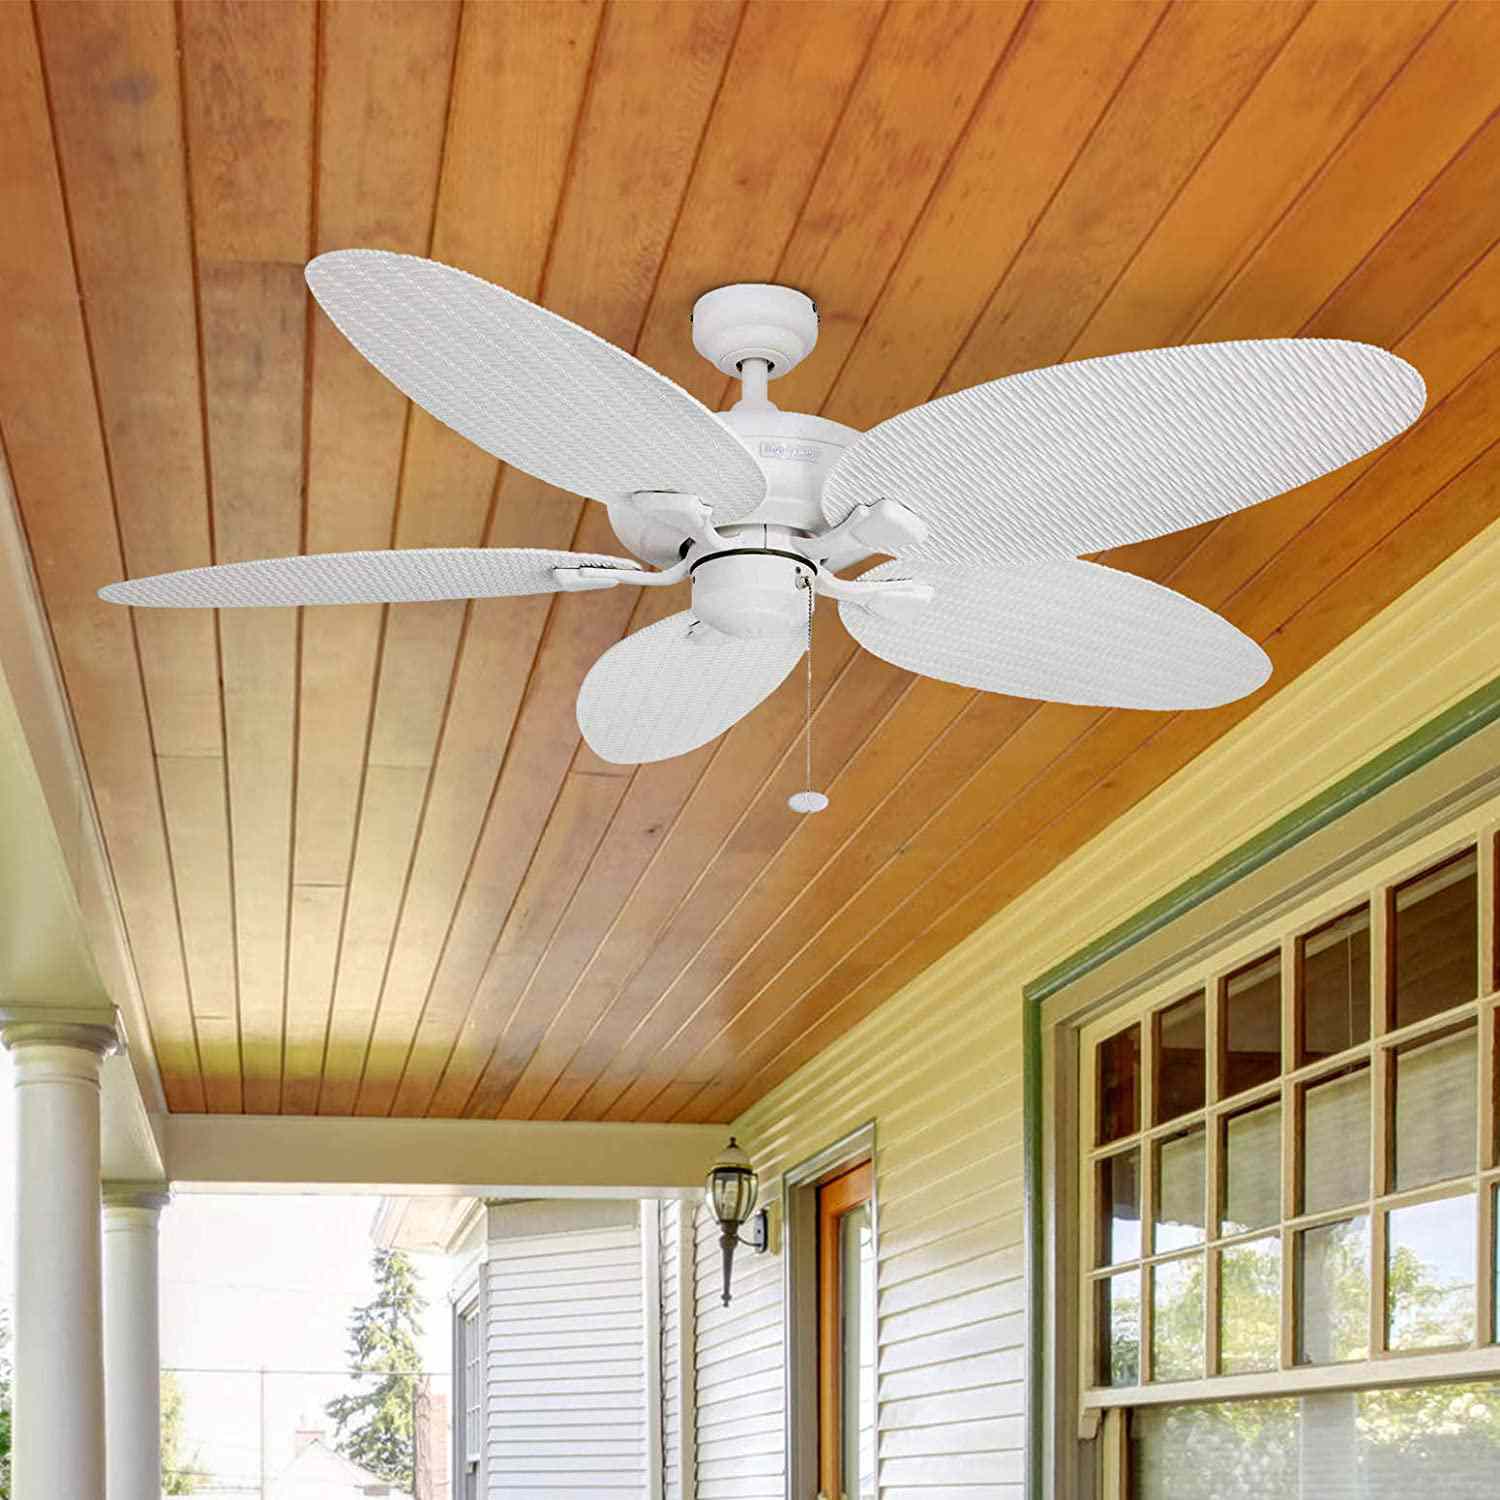 What Size Ceiling Fan For An Outdoor Patio?